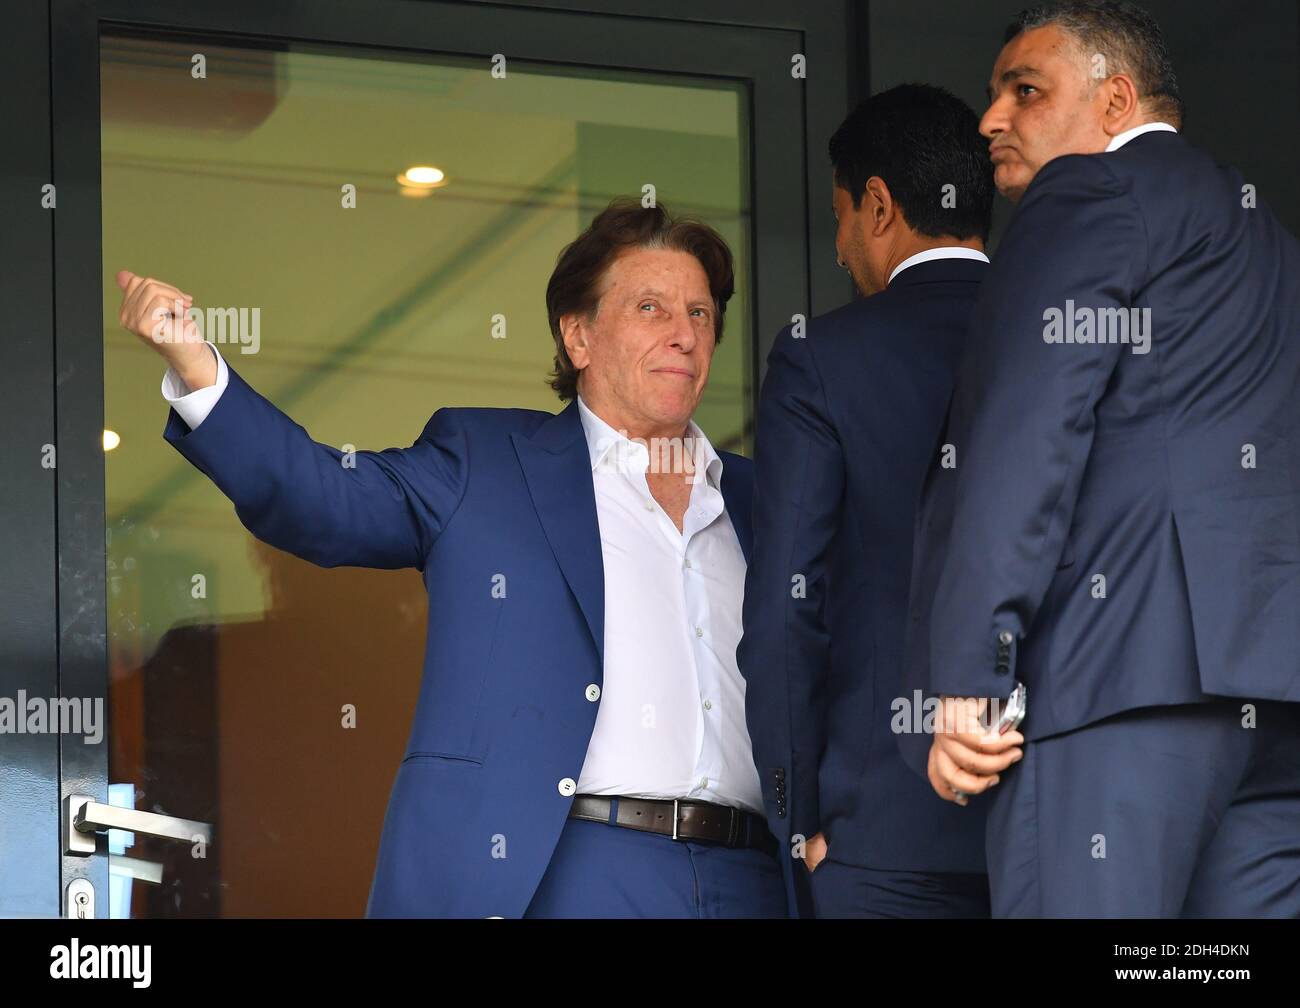 Israeli football agent Pini Zahavi chats with PSG's Qatari president Nasser  Al-Khelaifi as they watch from the stands Ligue 1 football match PSG vs  Amiens SC held at Parc des Princes stadium